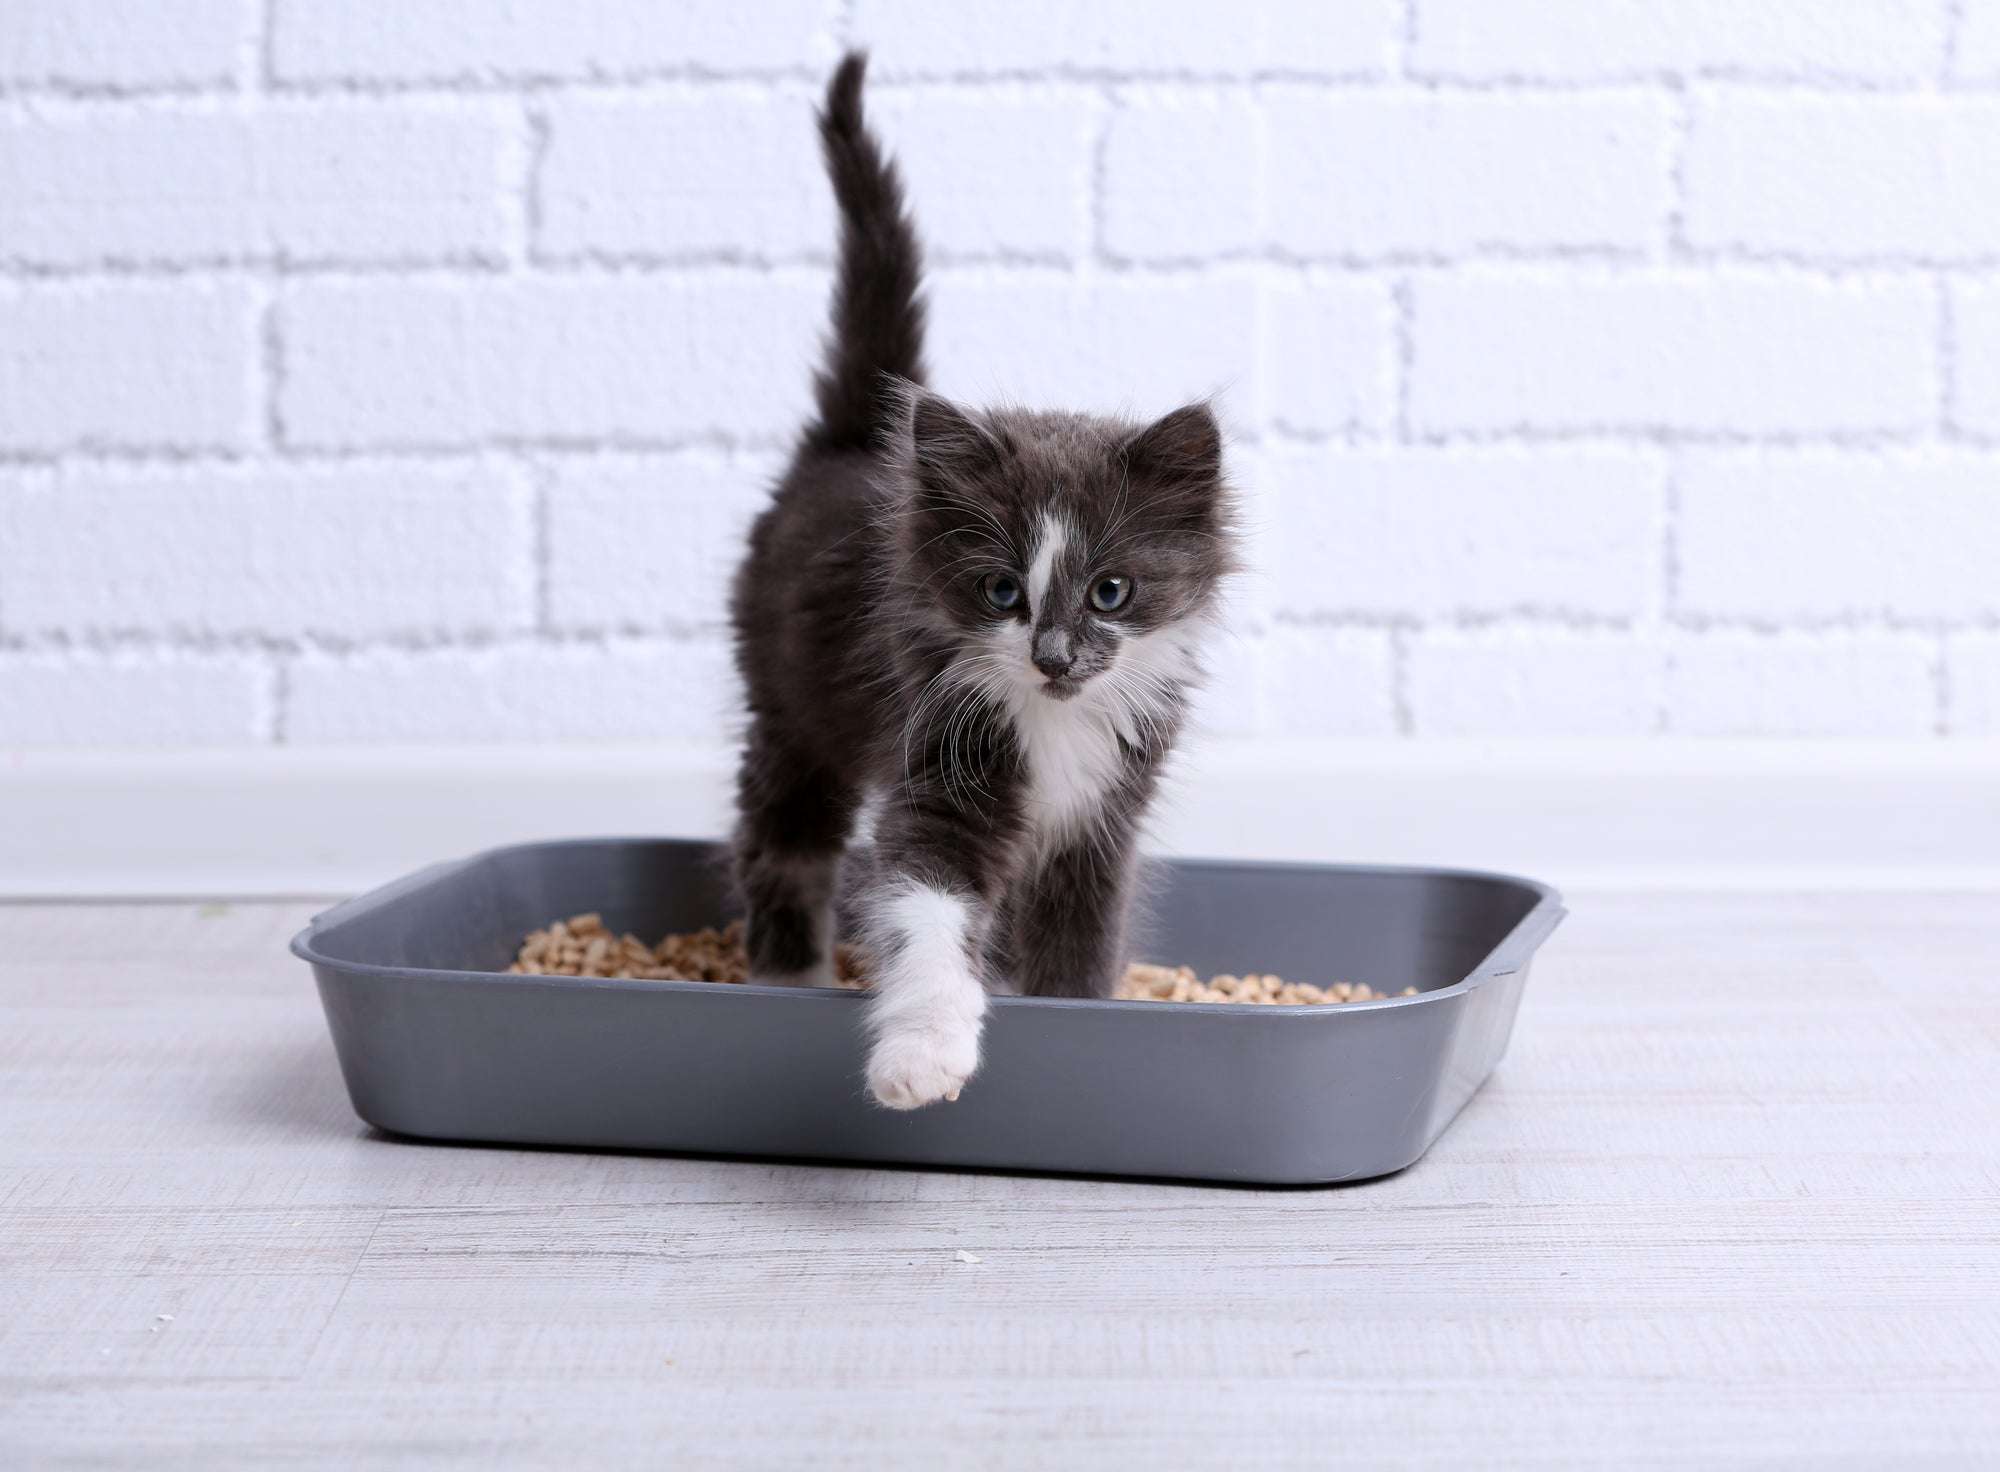 Is Your Cat Eating Litter? Check Out these 5 Simple Tips